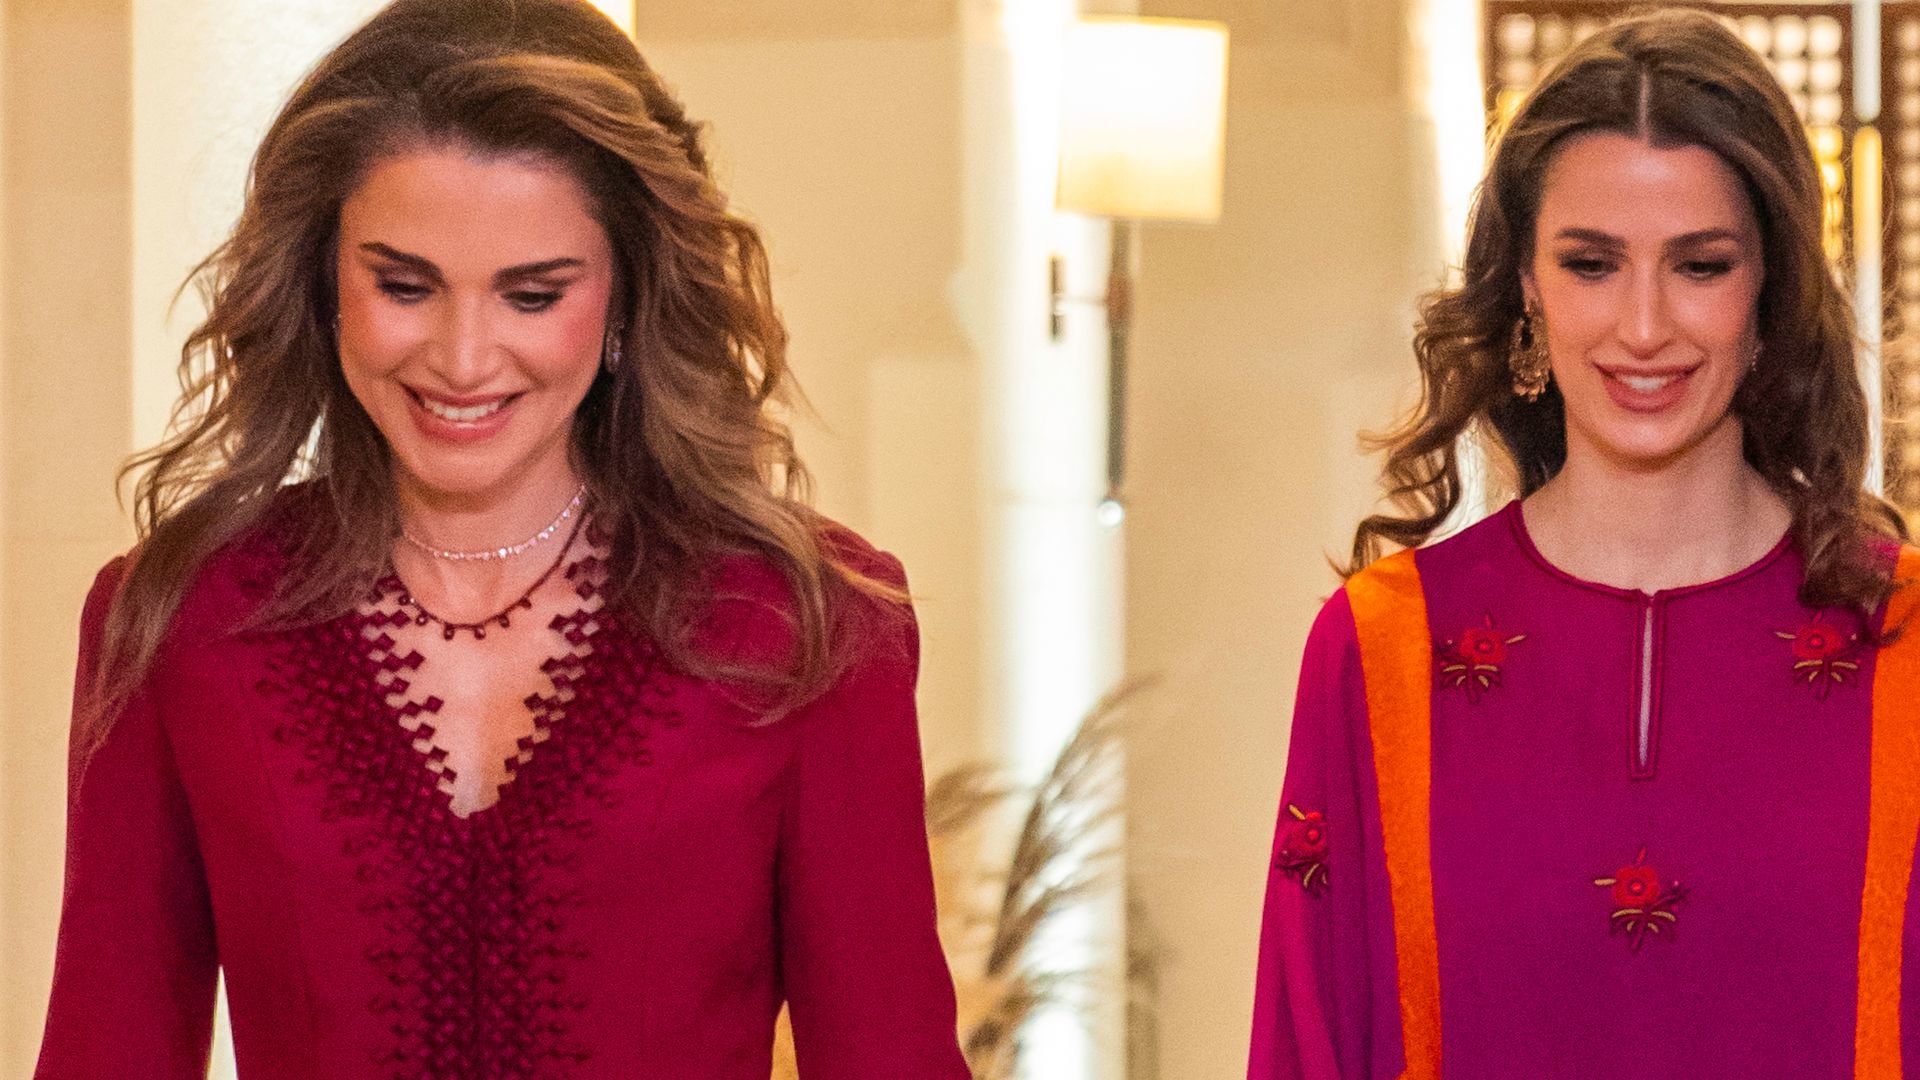 Queen Rania and Rajwa Al Saif attend her Henna party in March 2023 